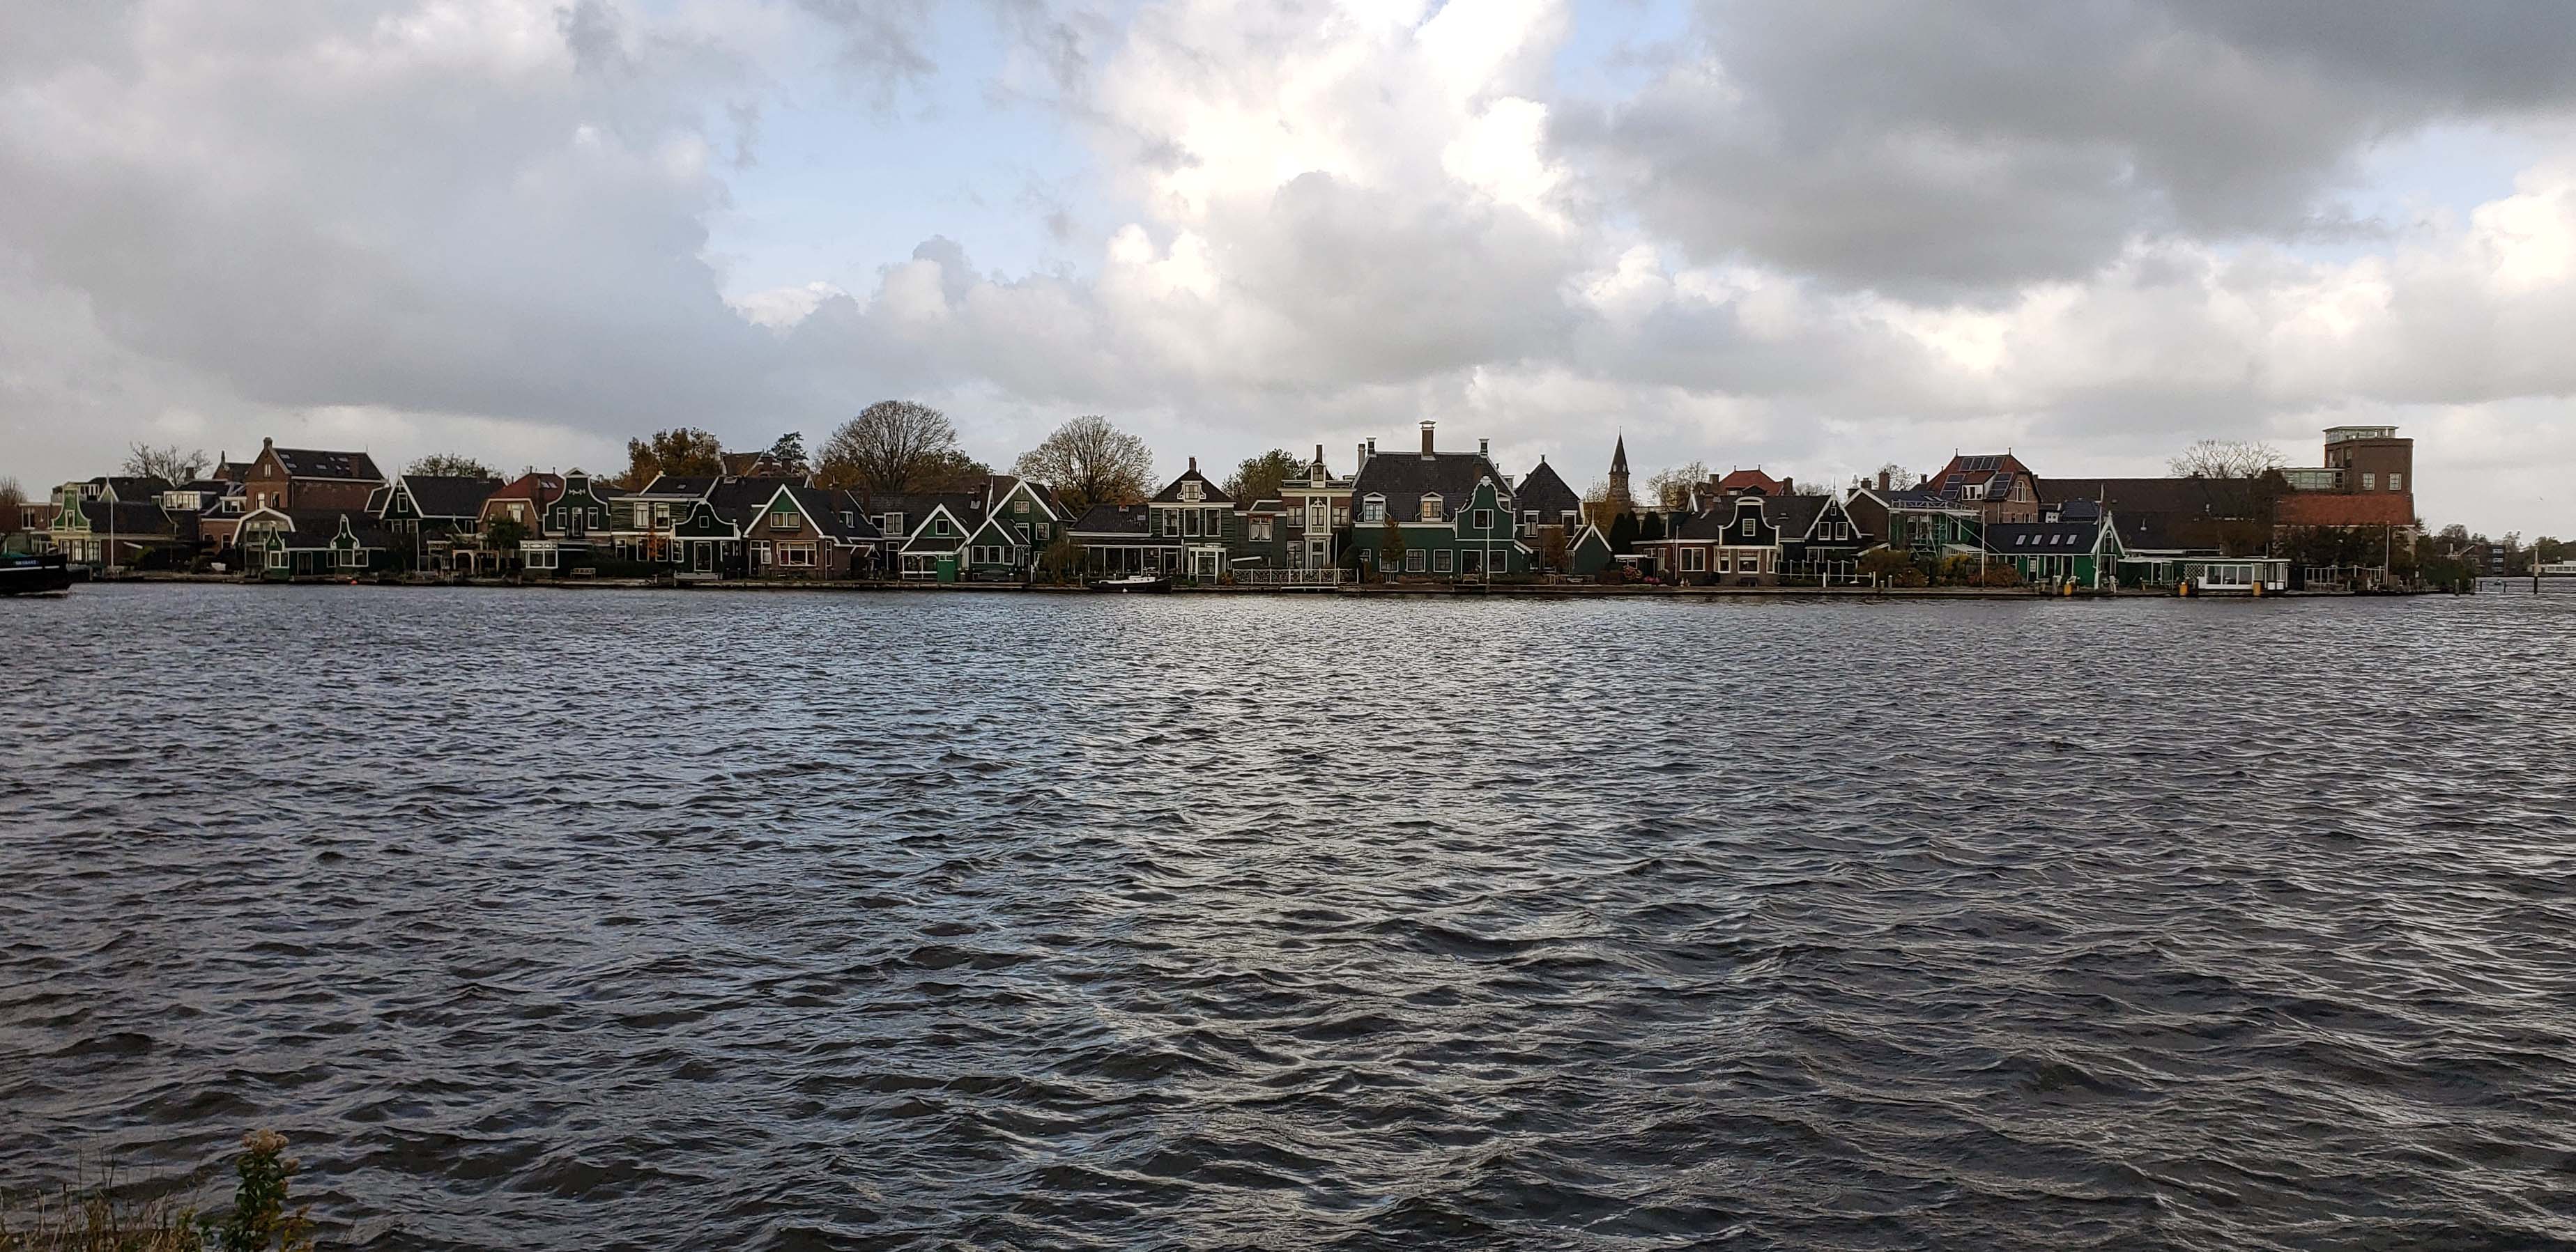 Zaanse Schans is a residential area where the 18th and 19th centuries are brought to life. It is a unique part of the Netherlands, full of wooden houses, mills, barns and workshops.